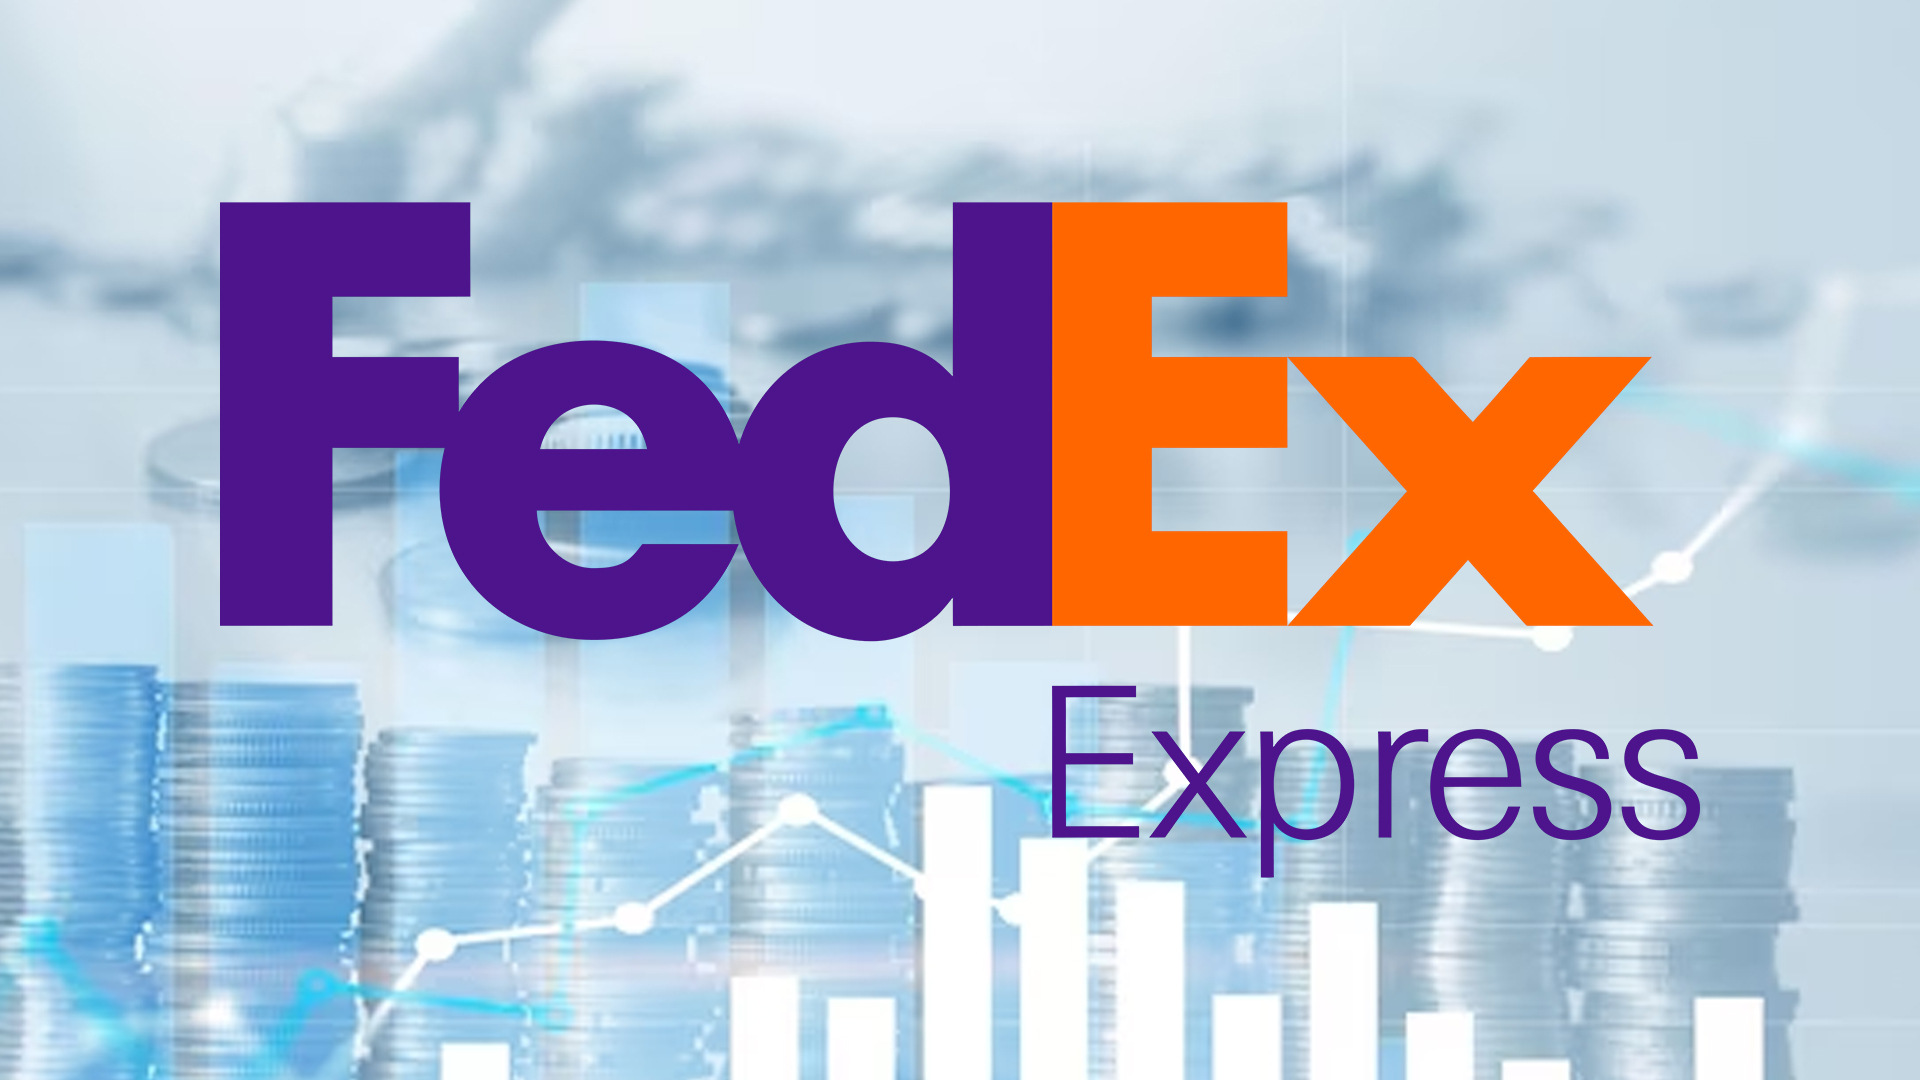 FedEx (FDX) Stock Forecast and Price Target